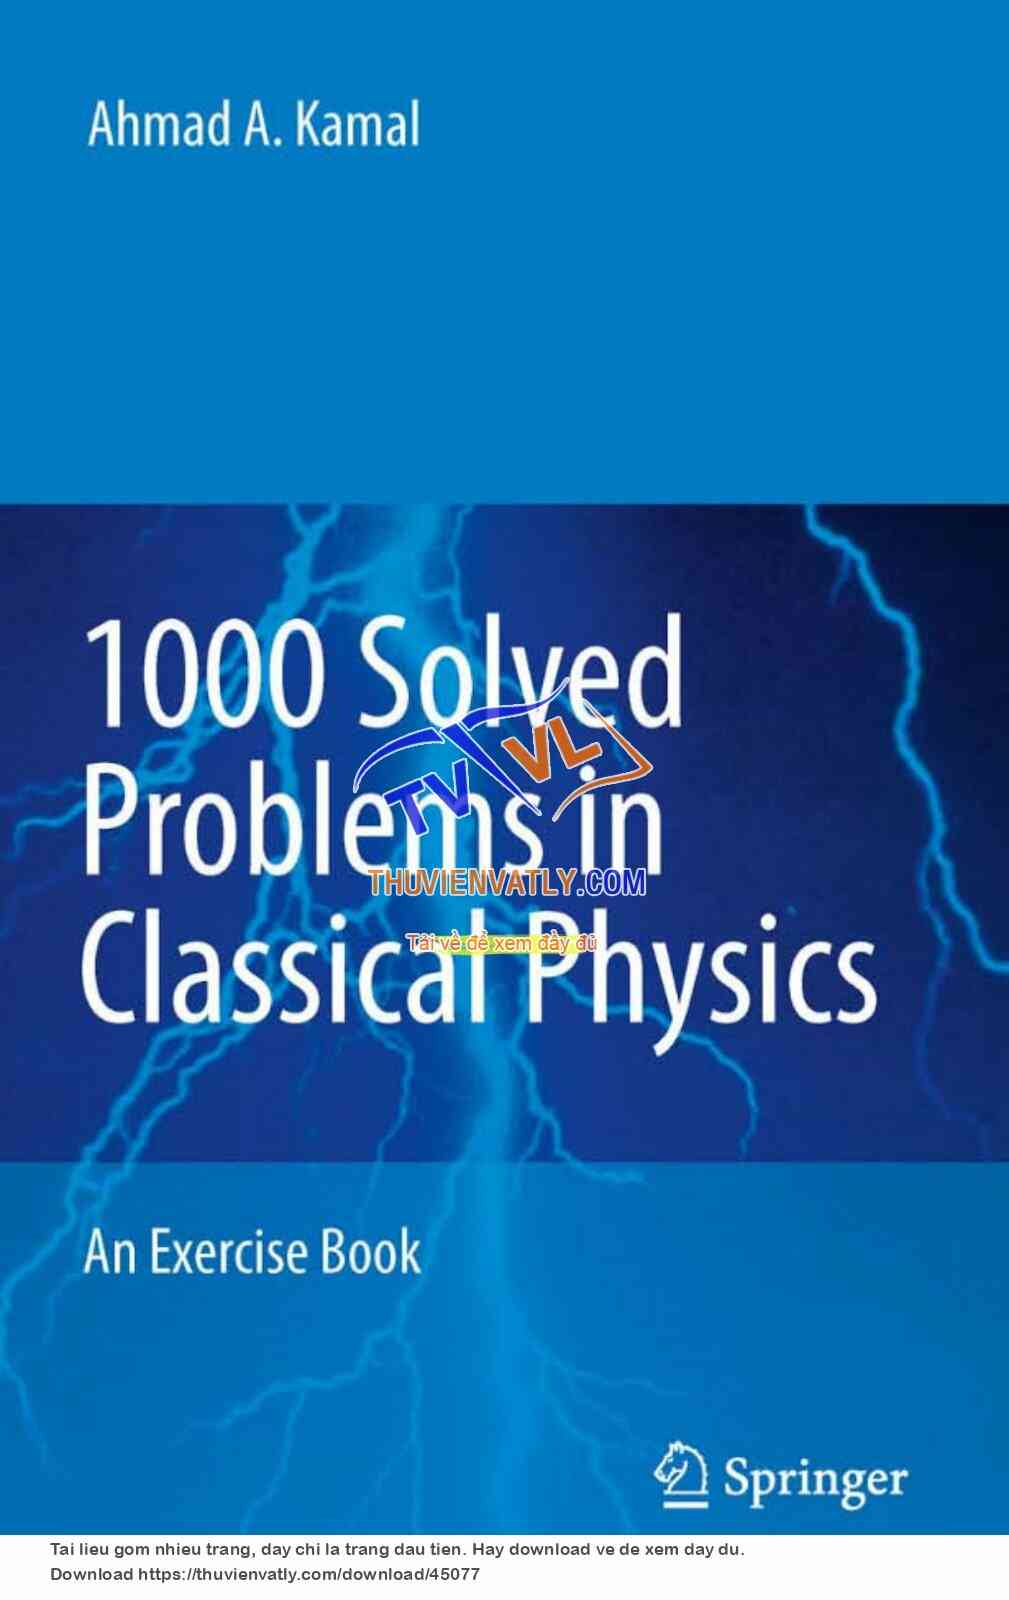 1000 Solved Problems in Classical Physics